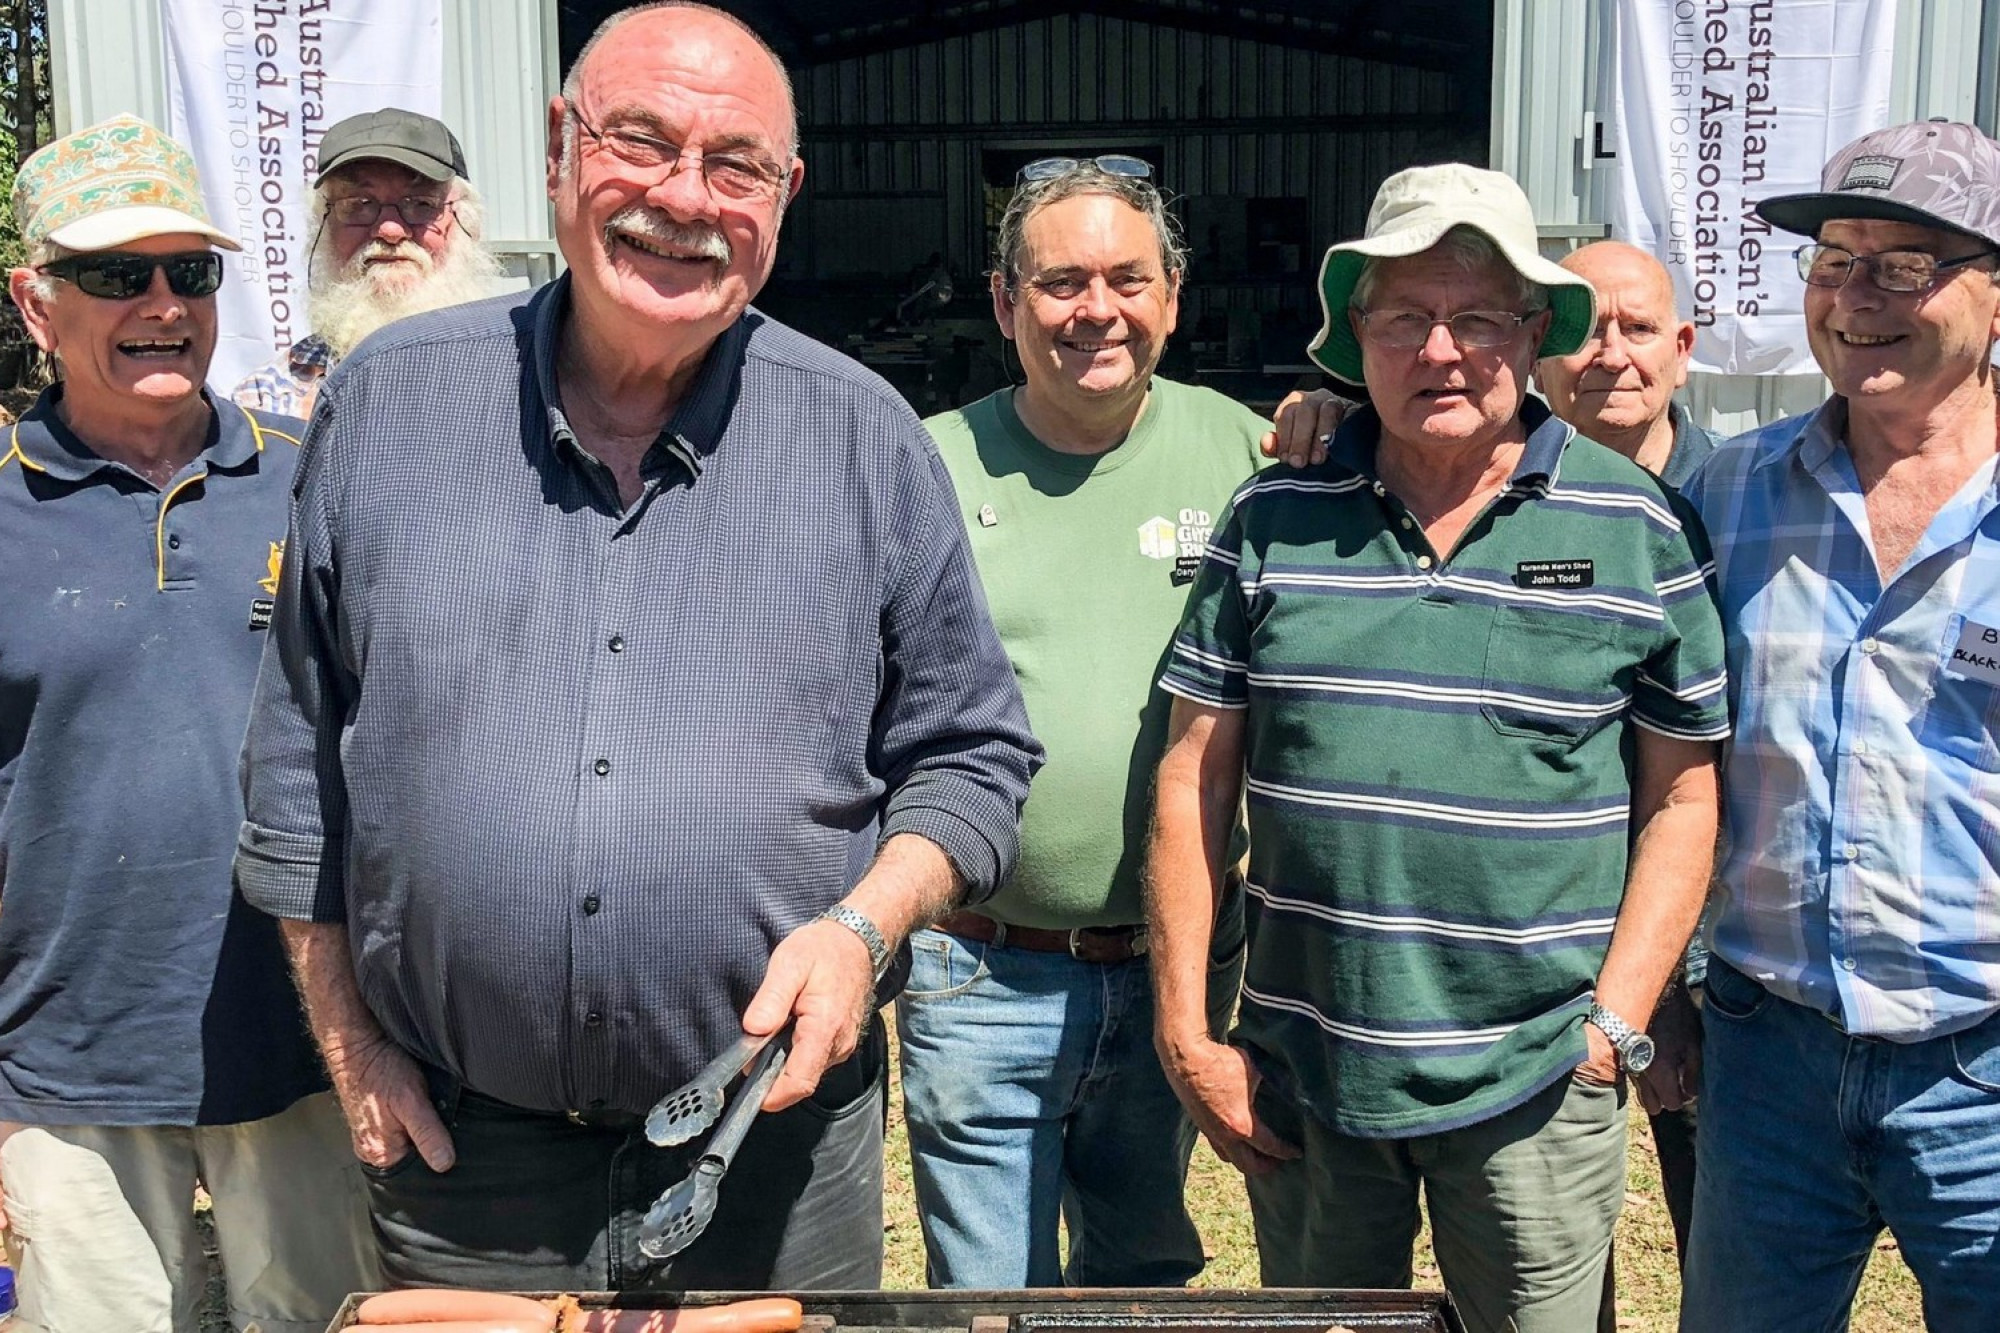 Men’s Shed receive funds - feature photo